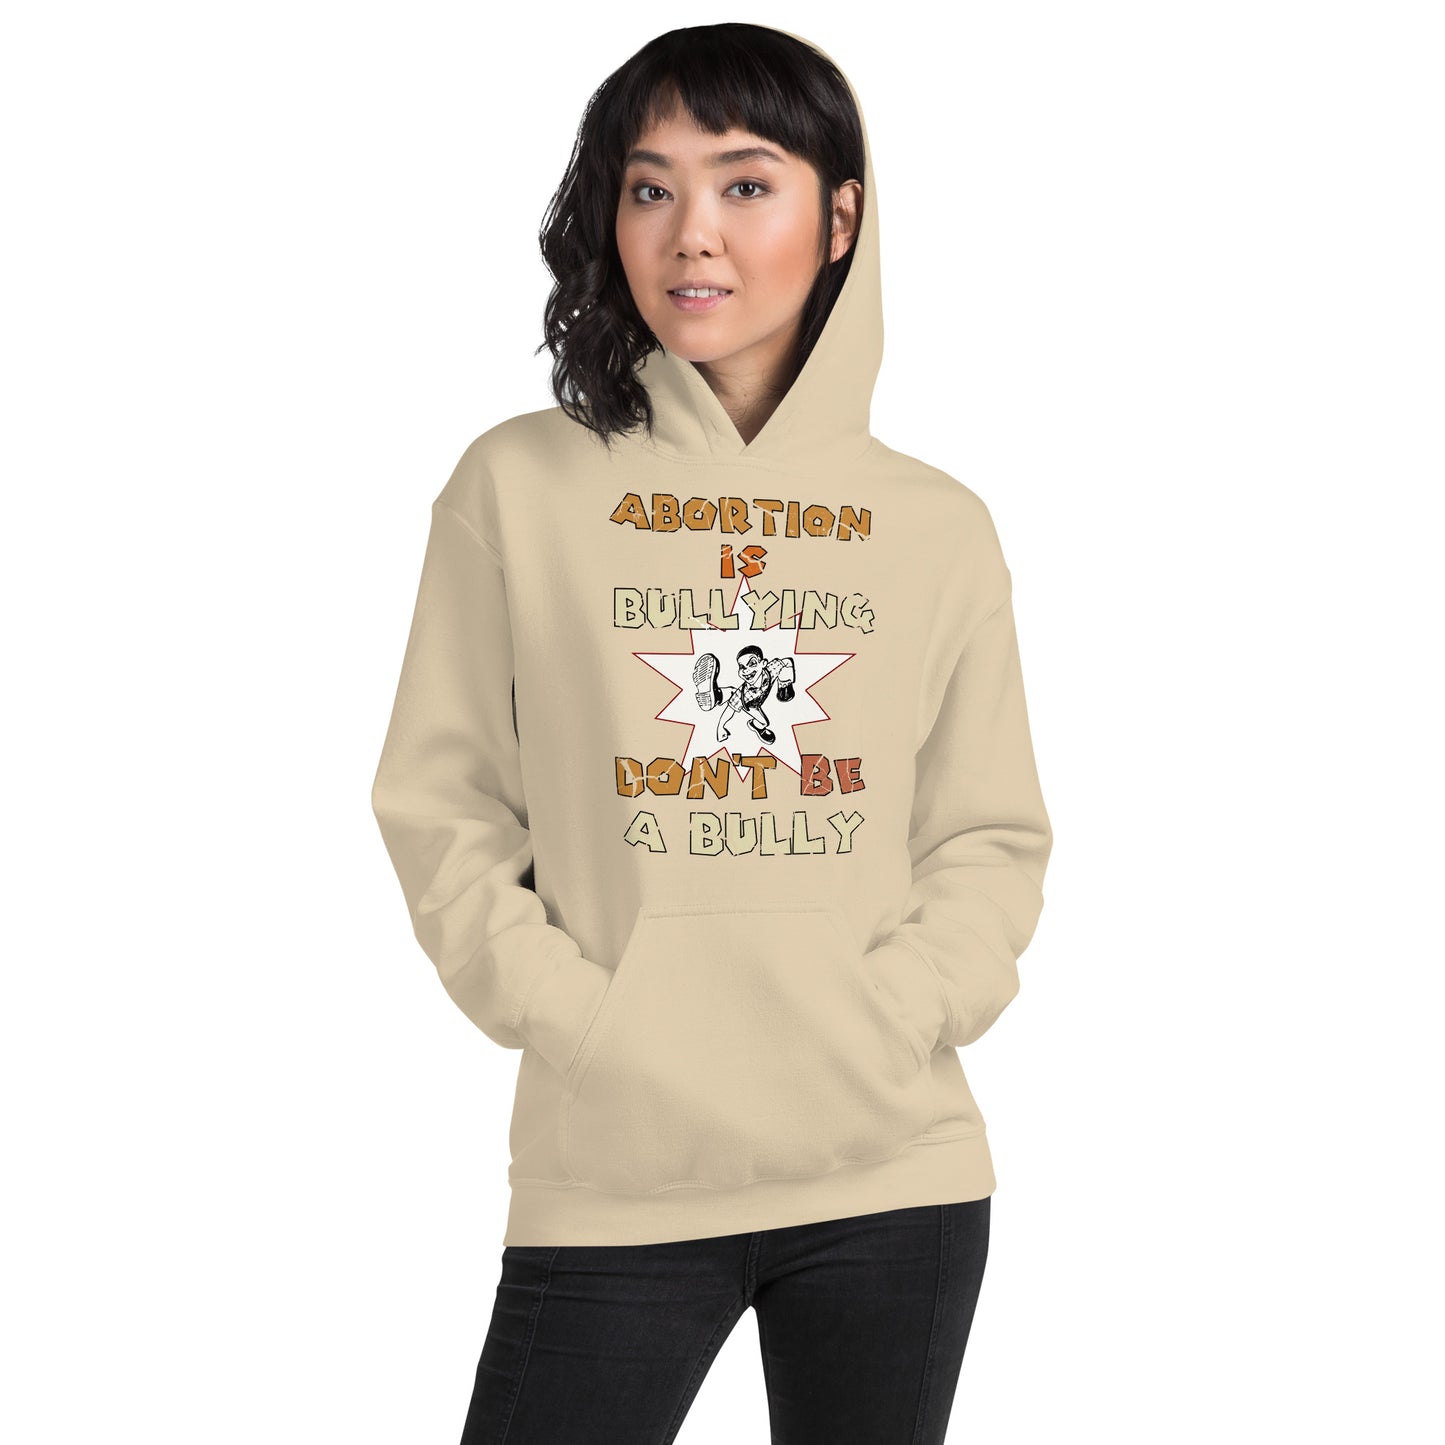 A001 Hoodie – Gildan 18500 Unisex Hoodie Featuring Mean Guy Graphic with text “Abortion is Bullying. Don’t be a Bully.”